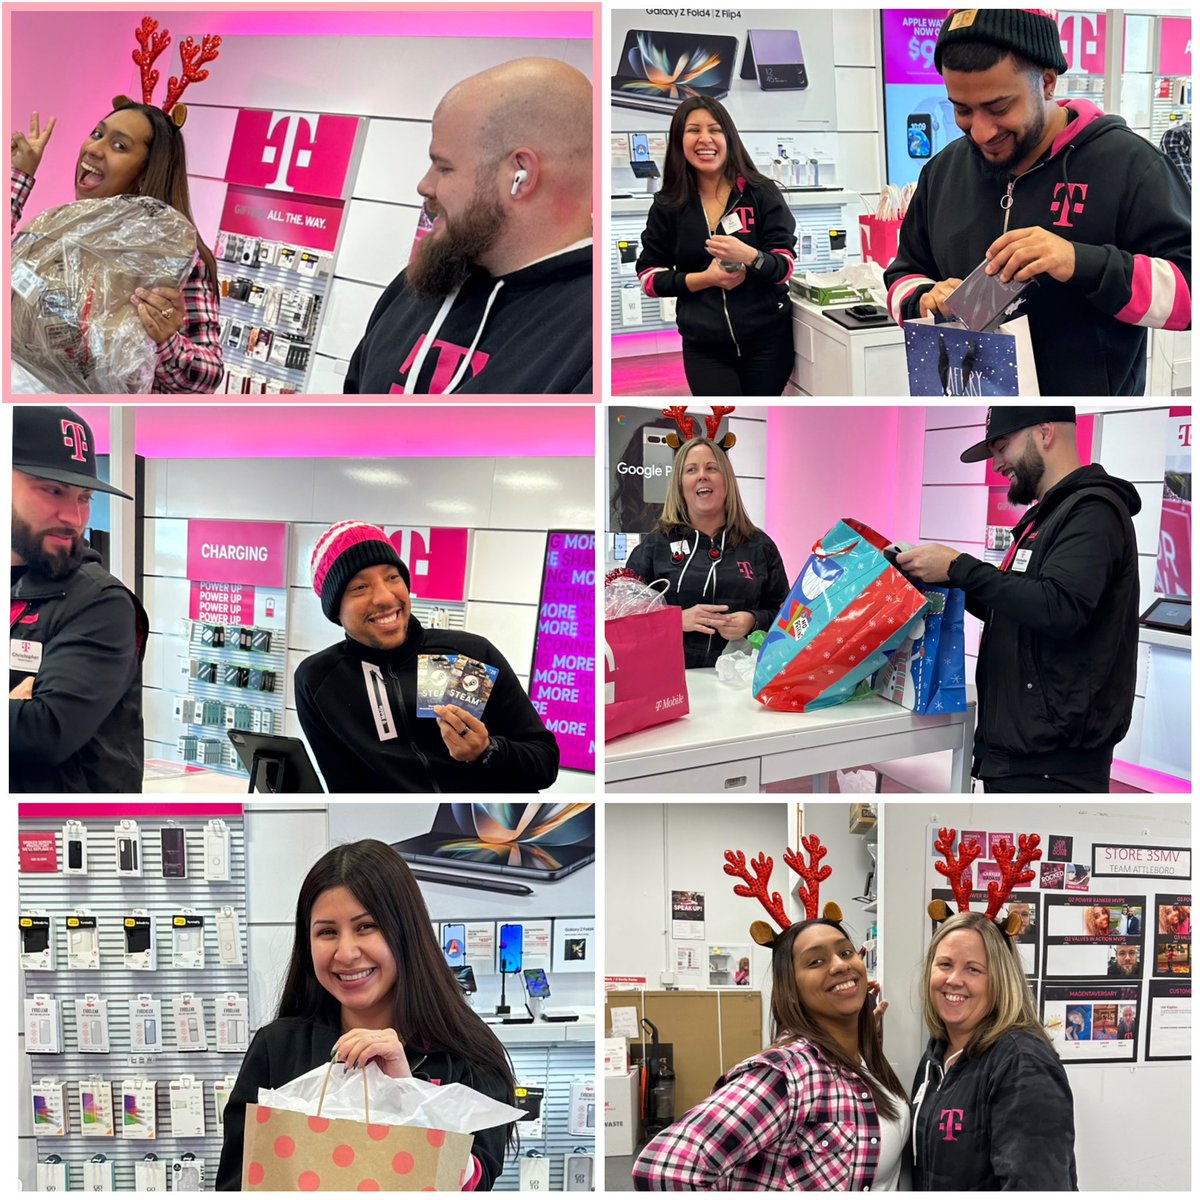 Happy Employee Appreciation Week to our Squad! Appreciate all you do each and everyday to deliver a world class experience! #magenta @GloriaSParedes